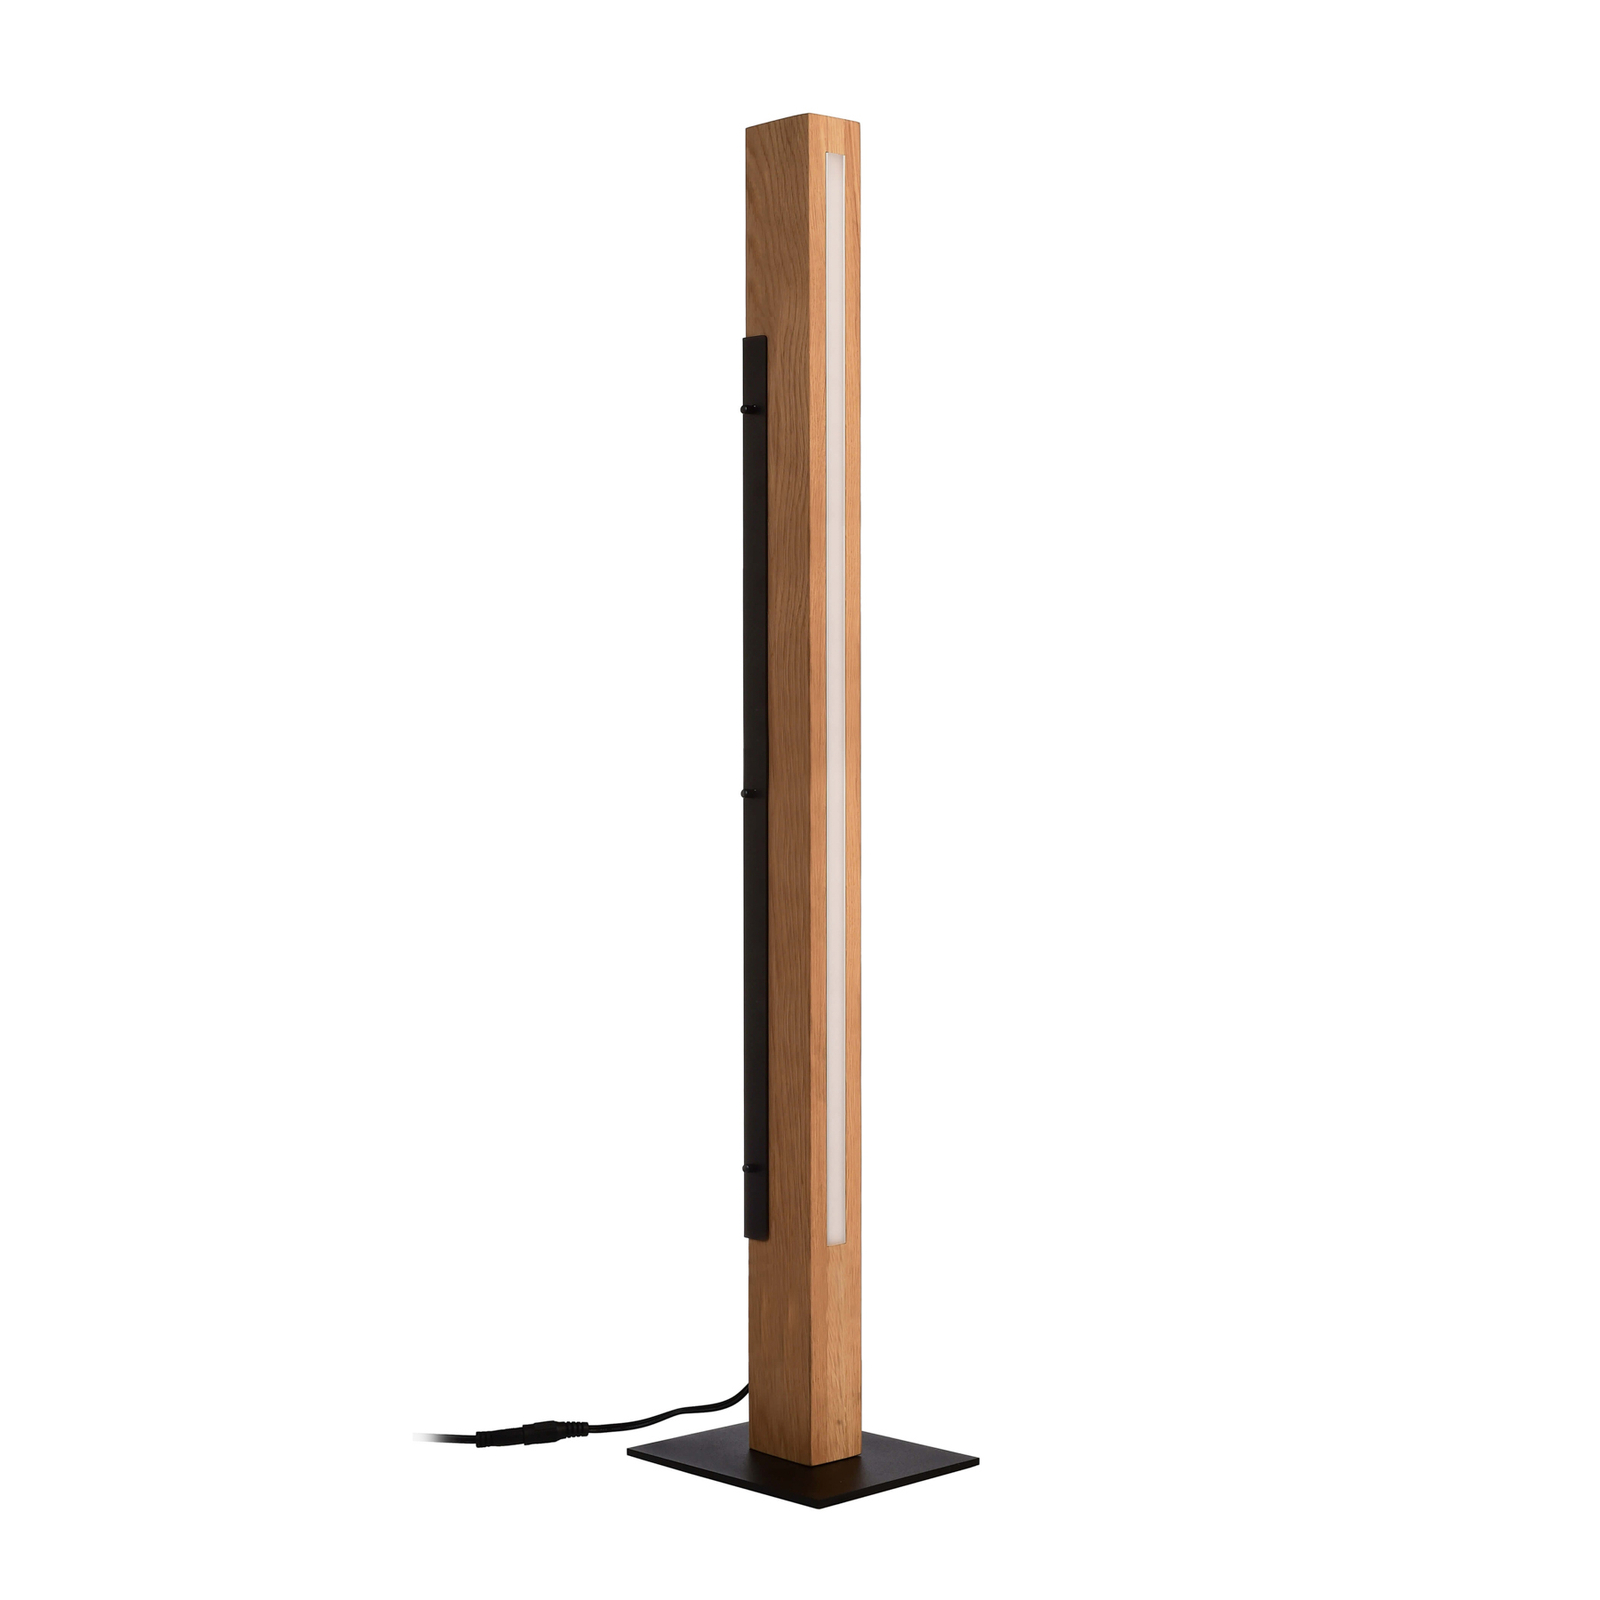 Madera LED floor lamp made of oak, dimmable